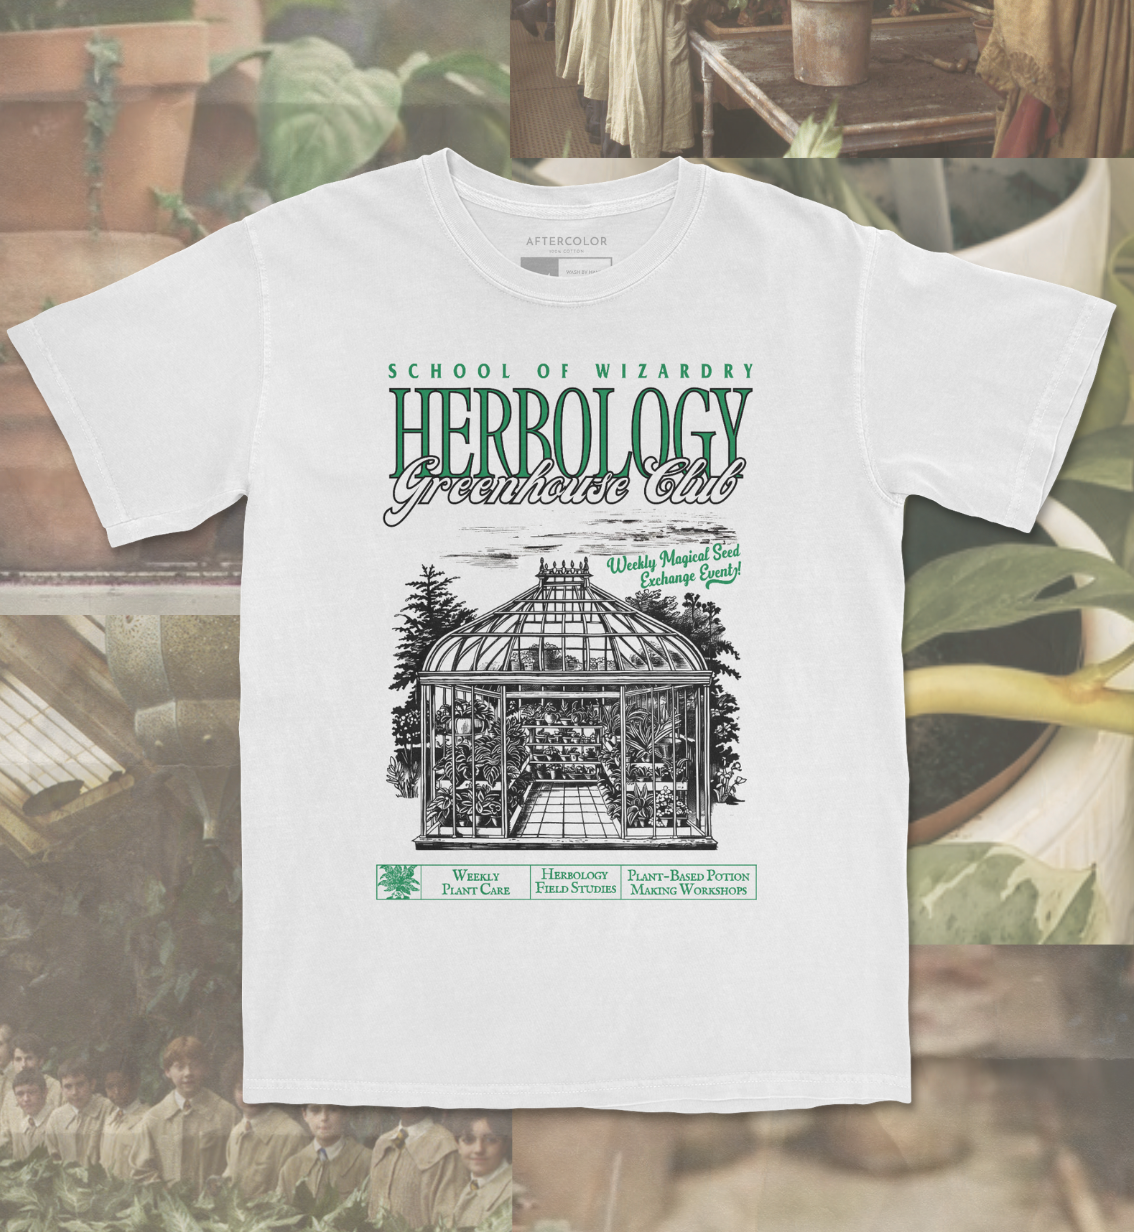 Herbology Green House Club Garment Dyed Tee